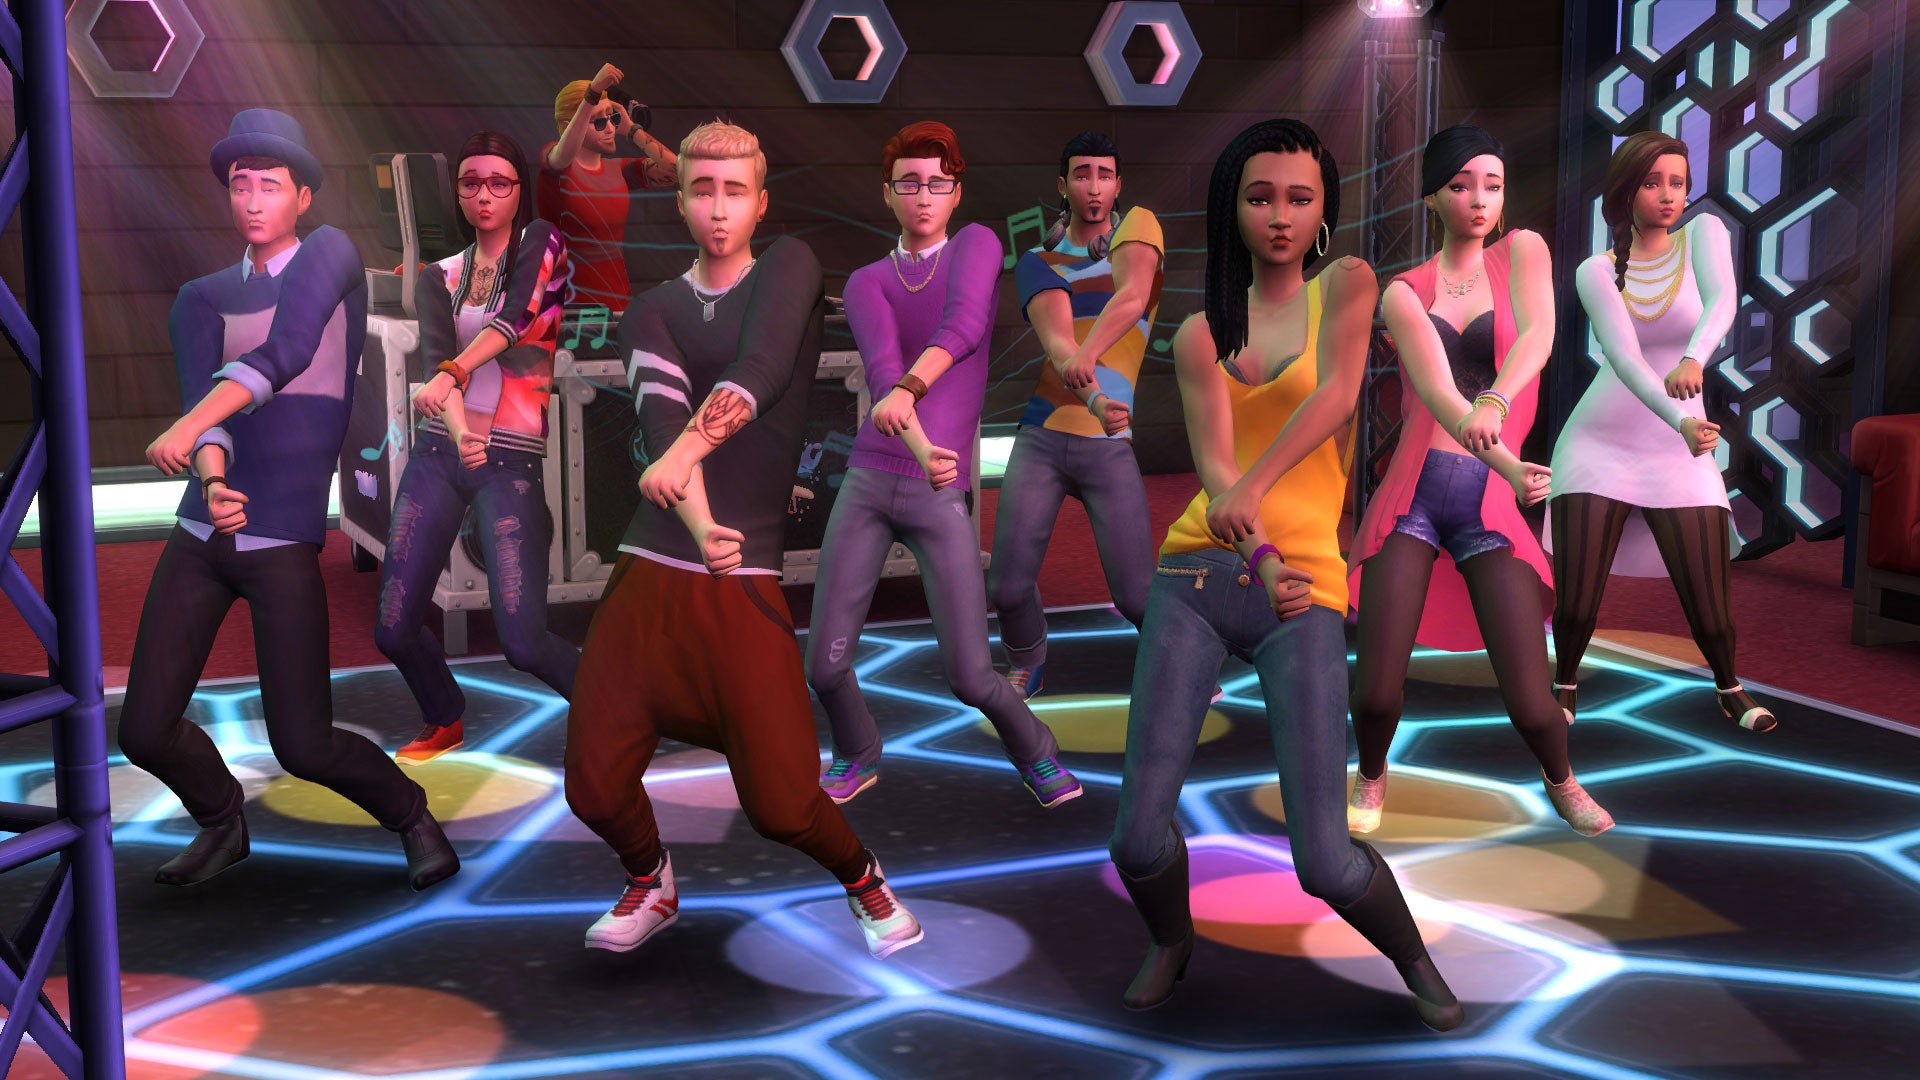 People dancing in a club in a The Sims 4: Get Together screenshot.